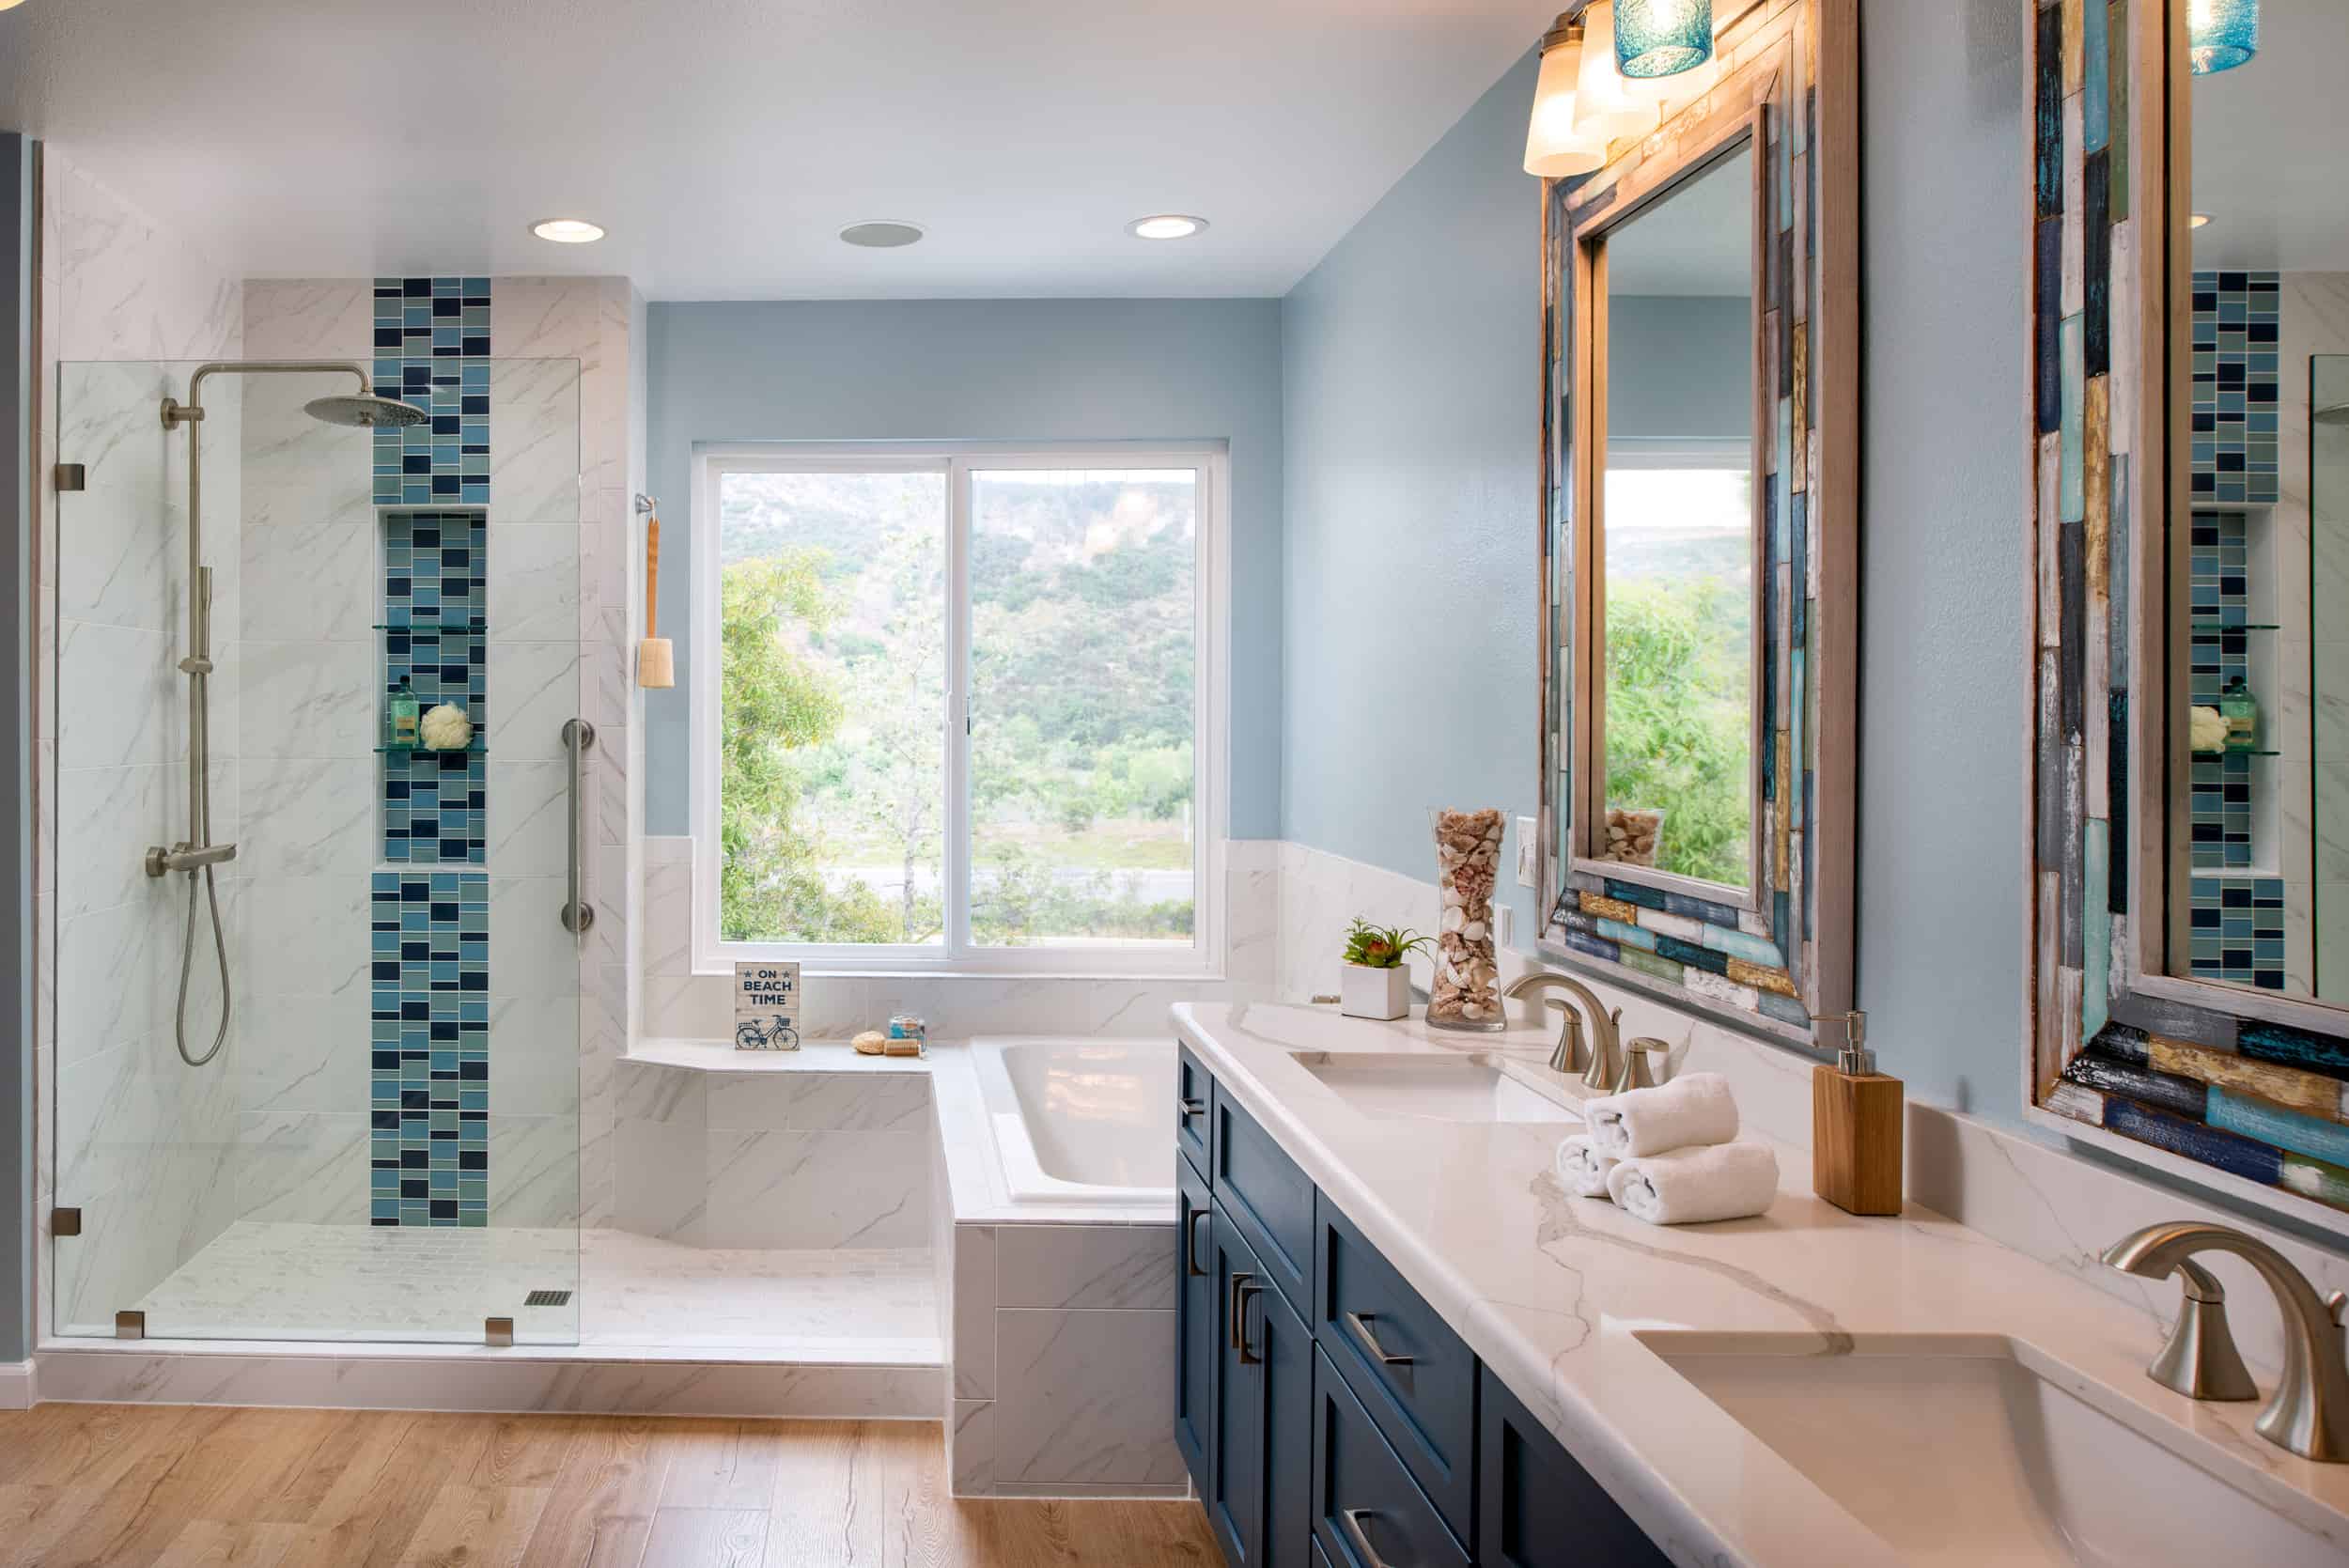 Cost Of Adding A Bathroom Remodel Works, How Much Does It Cost To Add A Bedroom And Bathroom Your House